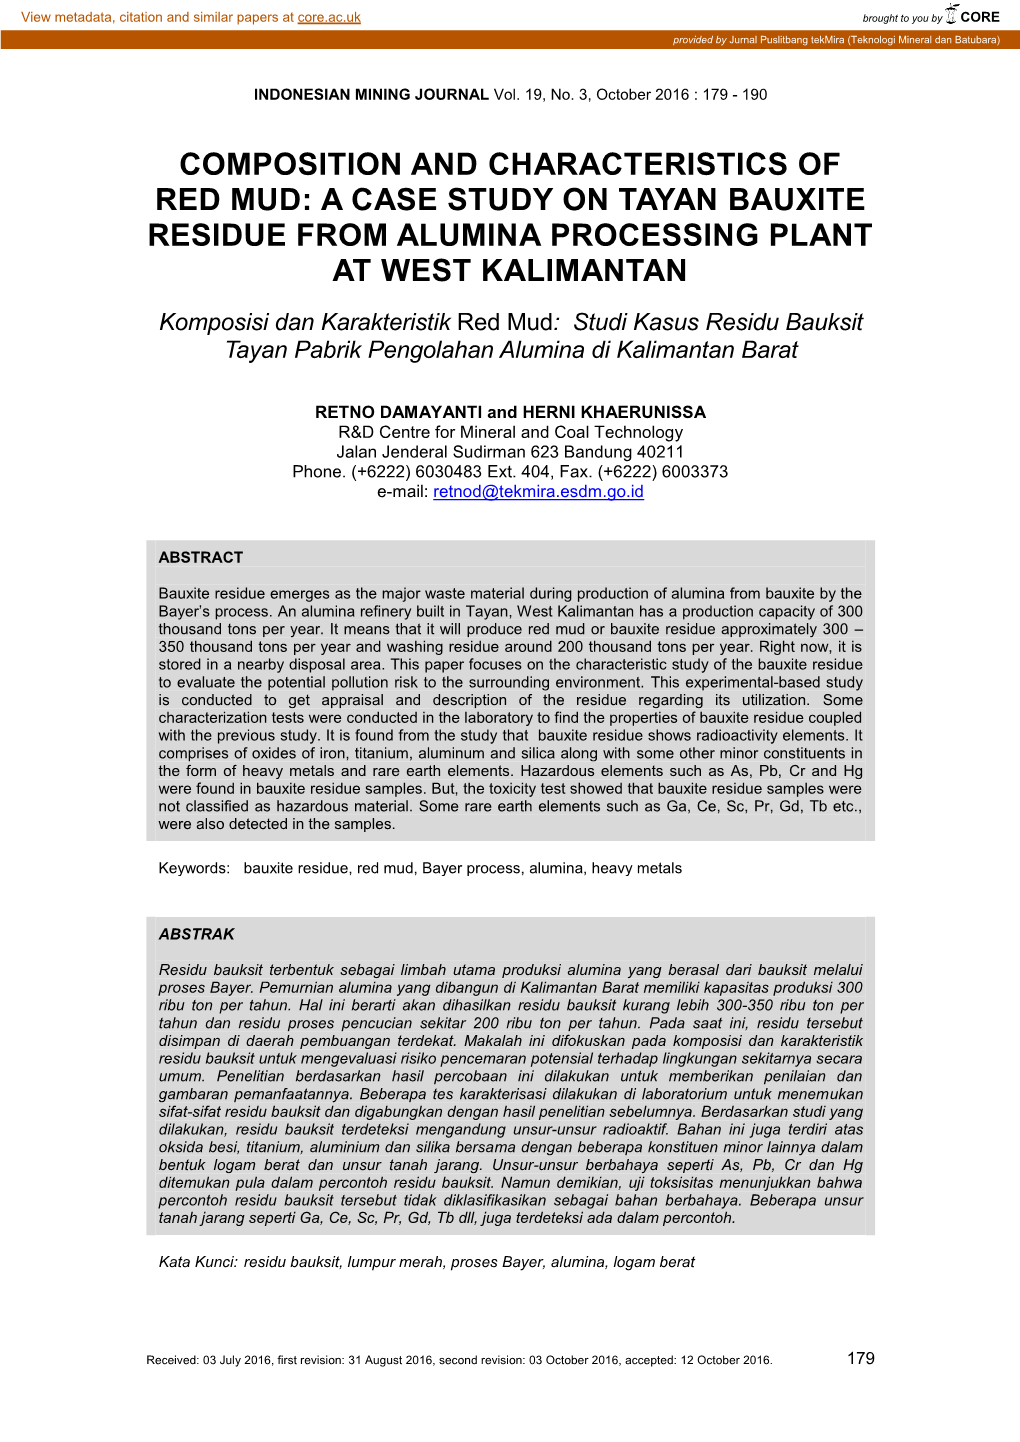 Composition and Characteristics of Red Mud: a Case Study on Tayan Bauxite Residue from Alumina Processing Plant at West Kalimantan